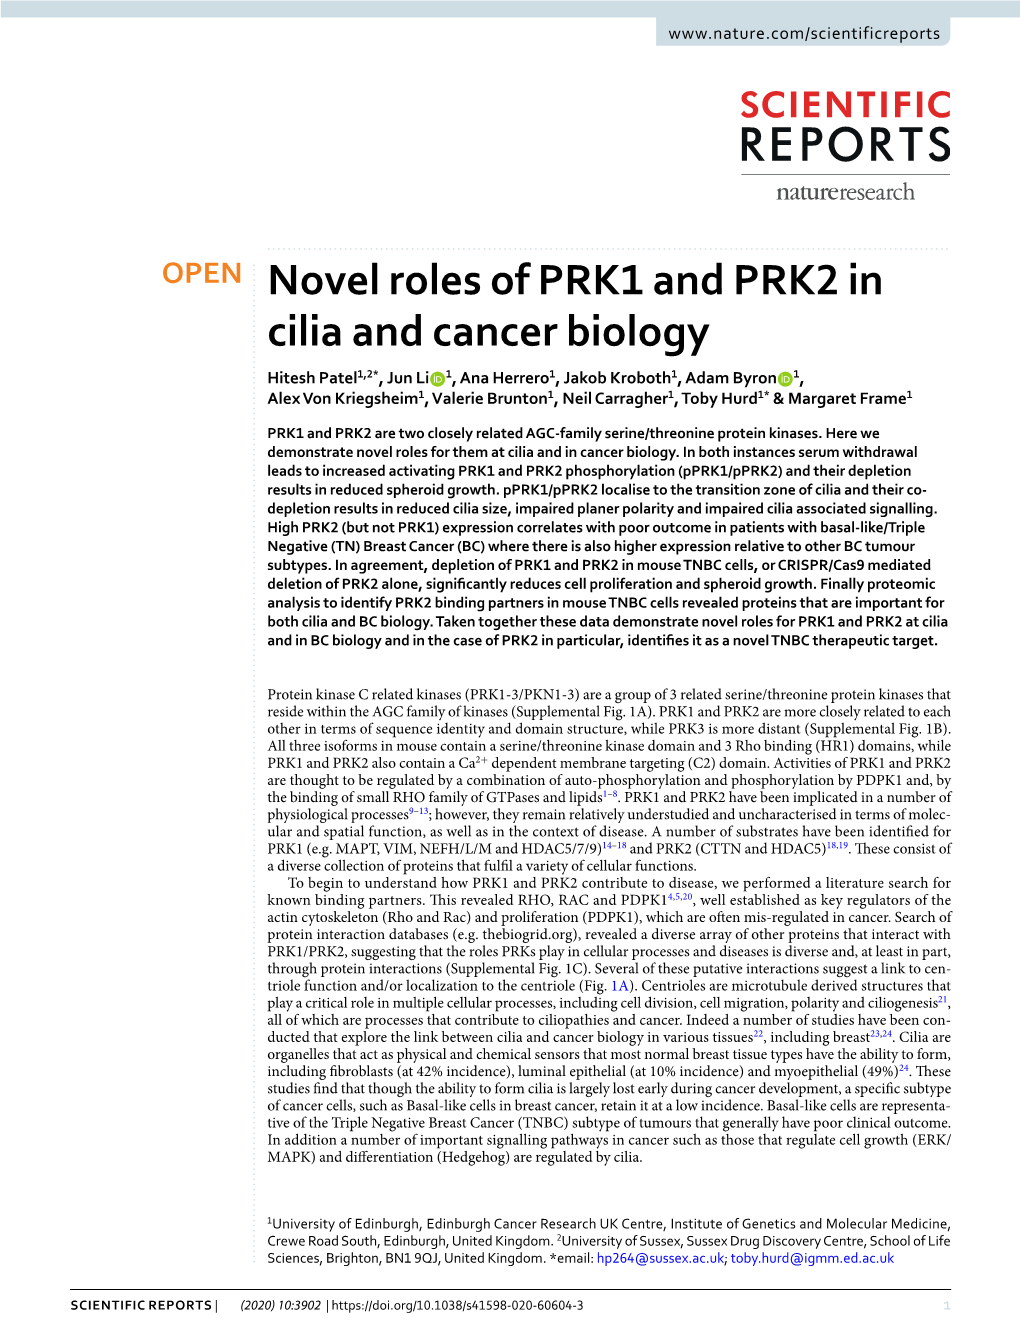 Novel Roles of PRK1 and PRK2 in Cilia and Cancer Biology